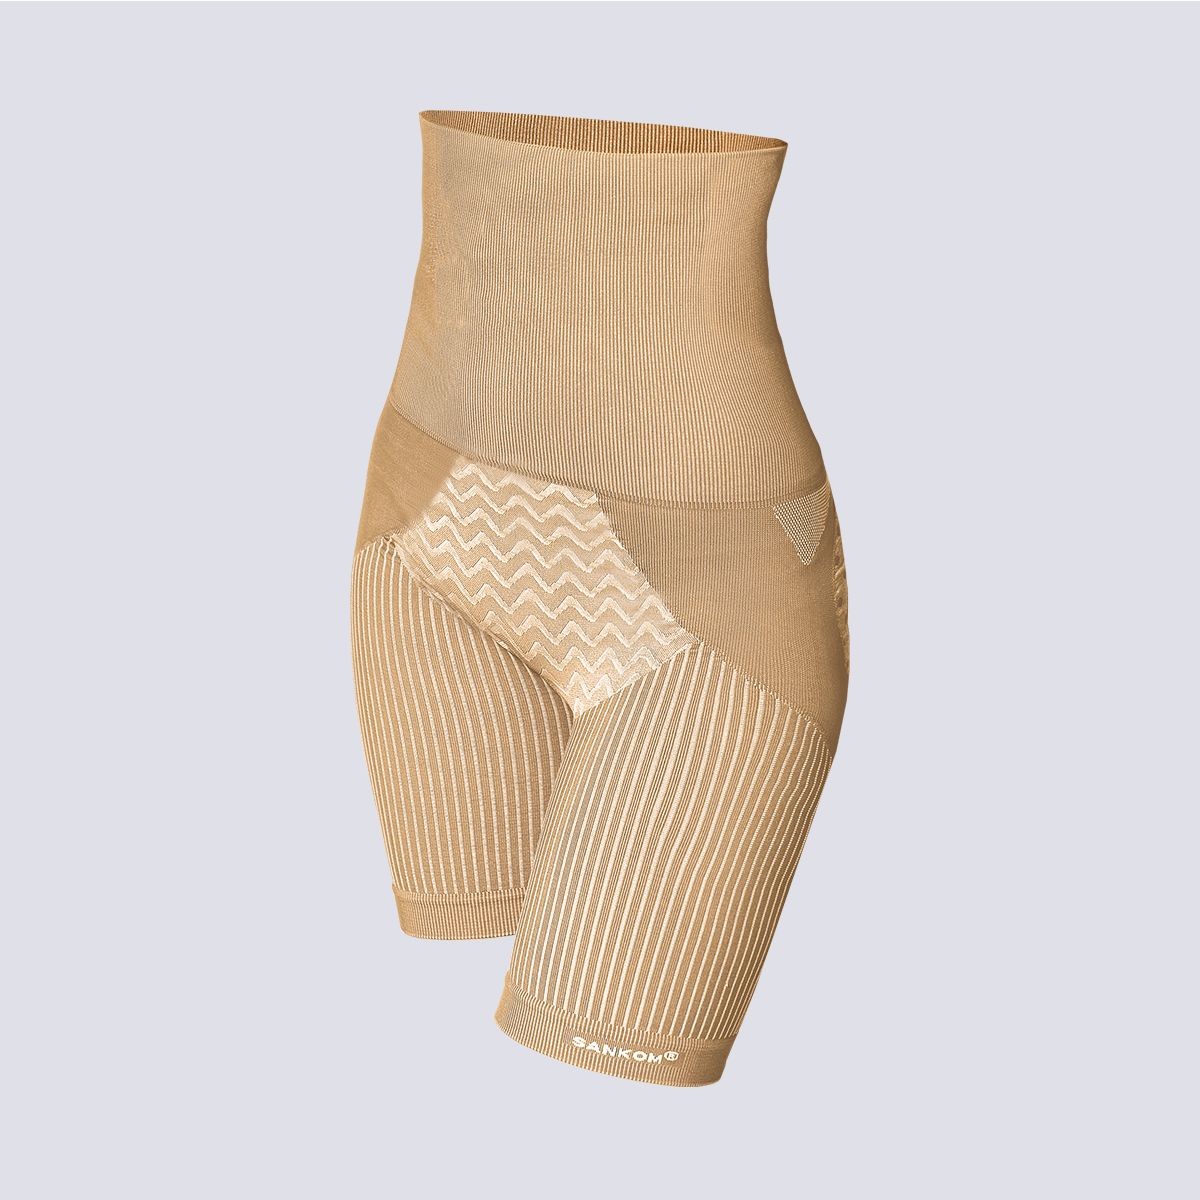 Buy Sankom Cool Women Shaper Beige Small And Medium in Qatar Orders  delivered quickly - Wellcare Pharmacy